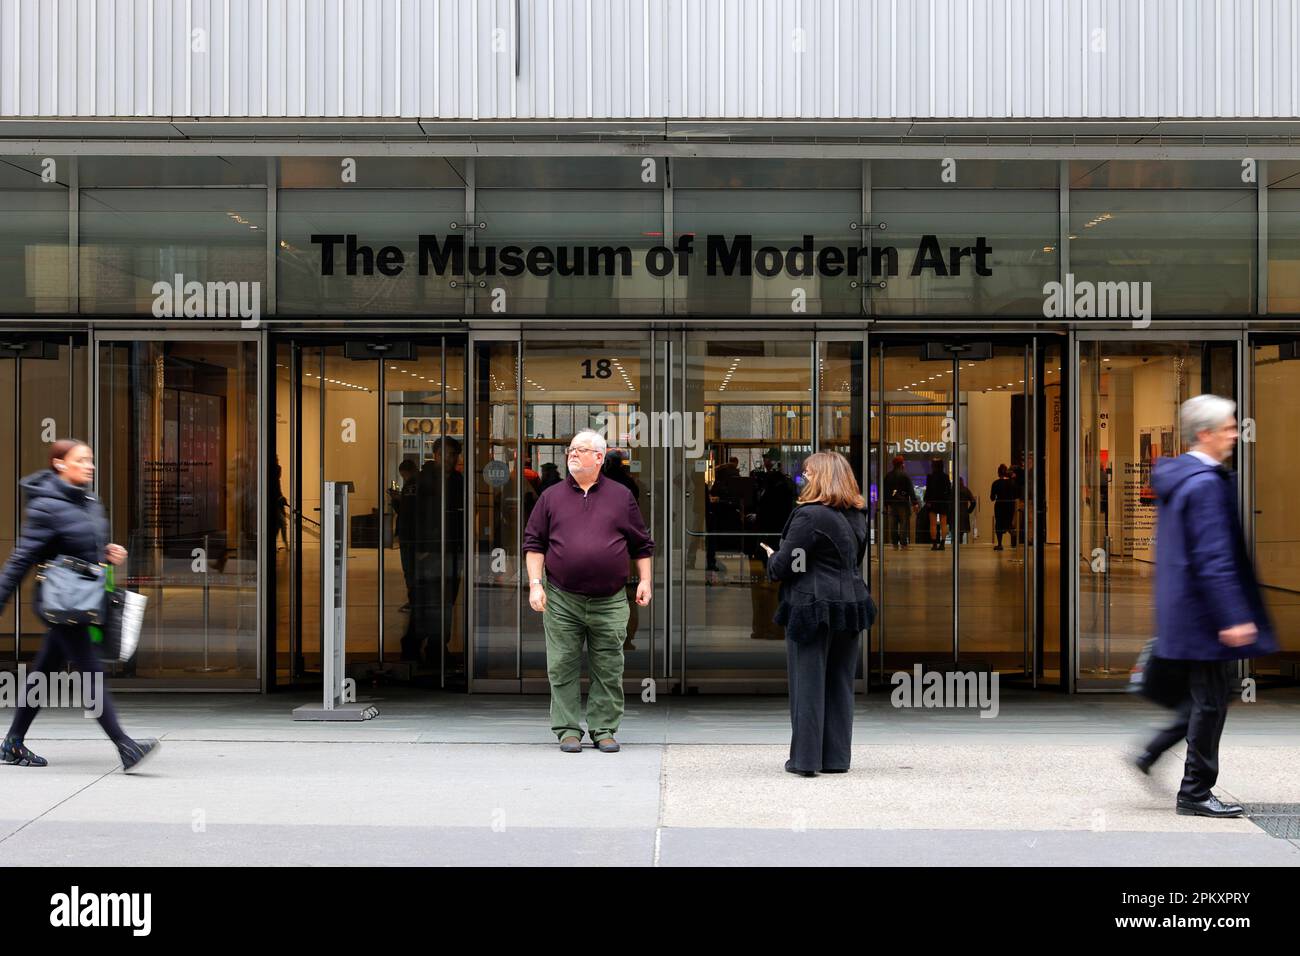 Museum of Modern Art, 11 W 53rd St, New York, NYC storefront photo of a modern art museum in Midtown Manhattan. Stock Photo